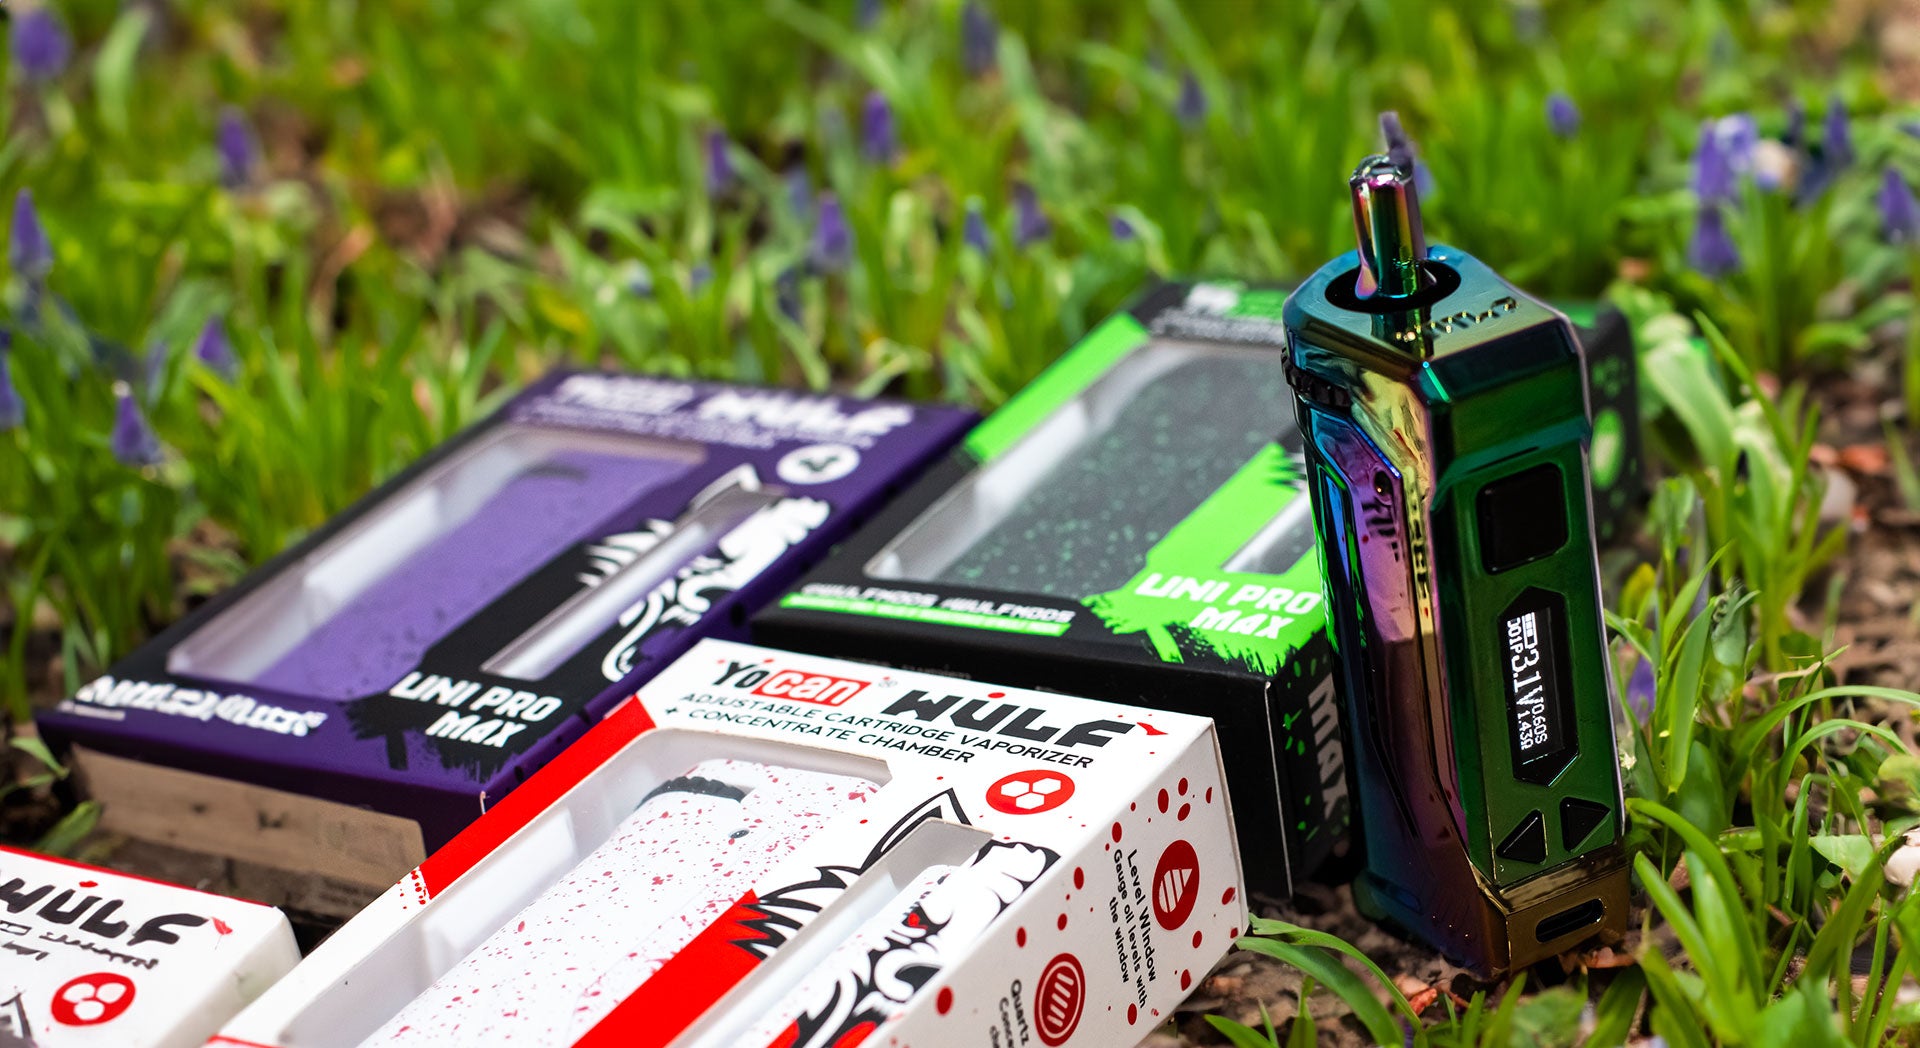 Wulf UNI Pro Max with packaging laying on grass outside with spring flowers